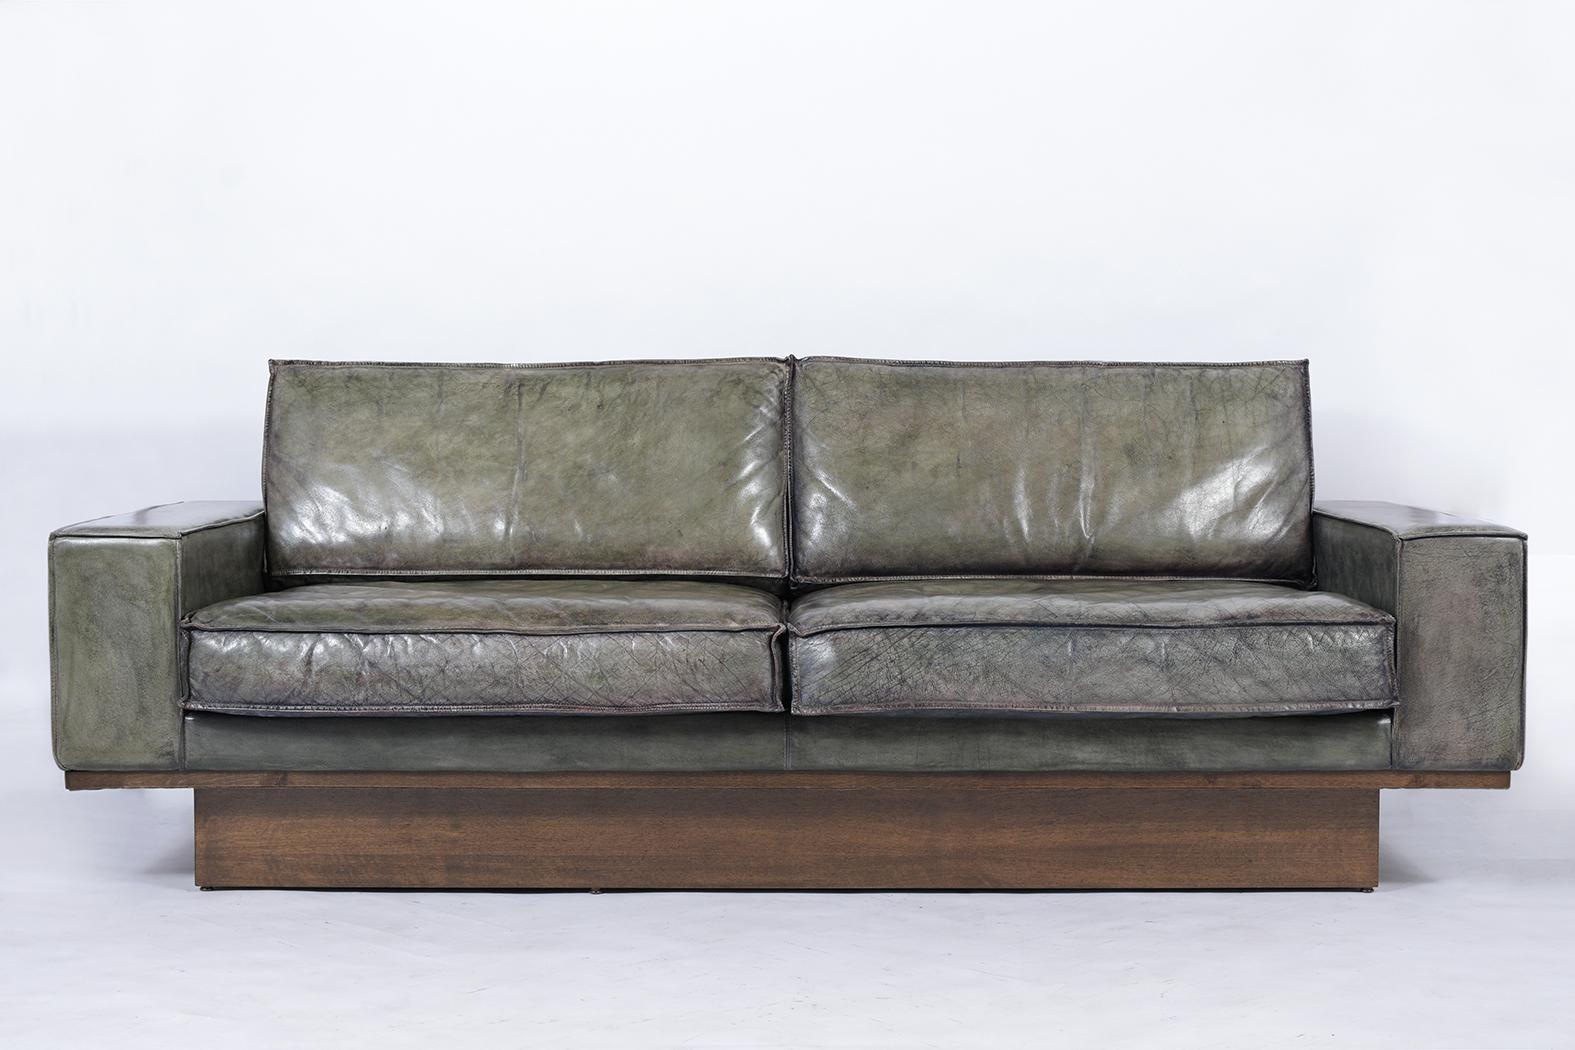 This mid-century modern sofa is upholstered in its original leather, which has been professionally dyed green with blue undertones and is in great condition. The sofa has single piping details, and comfortable foam and feather inserts. This large